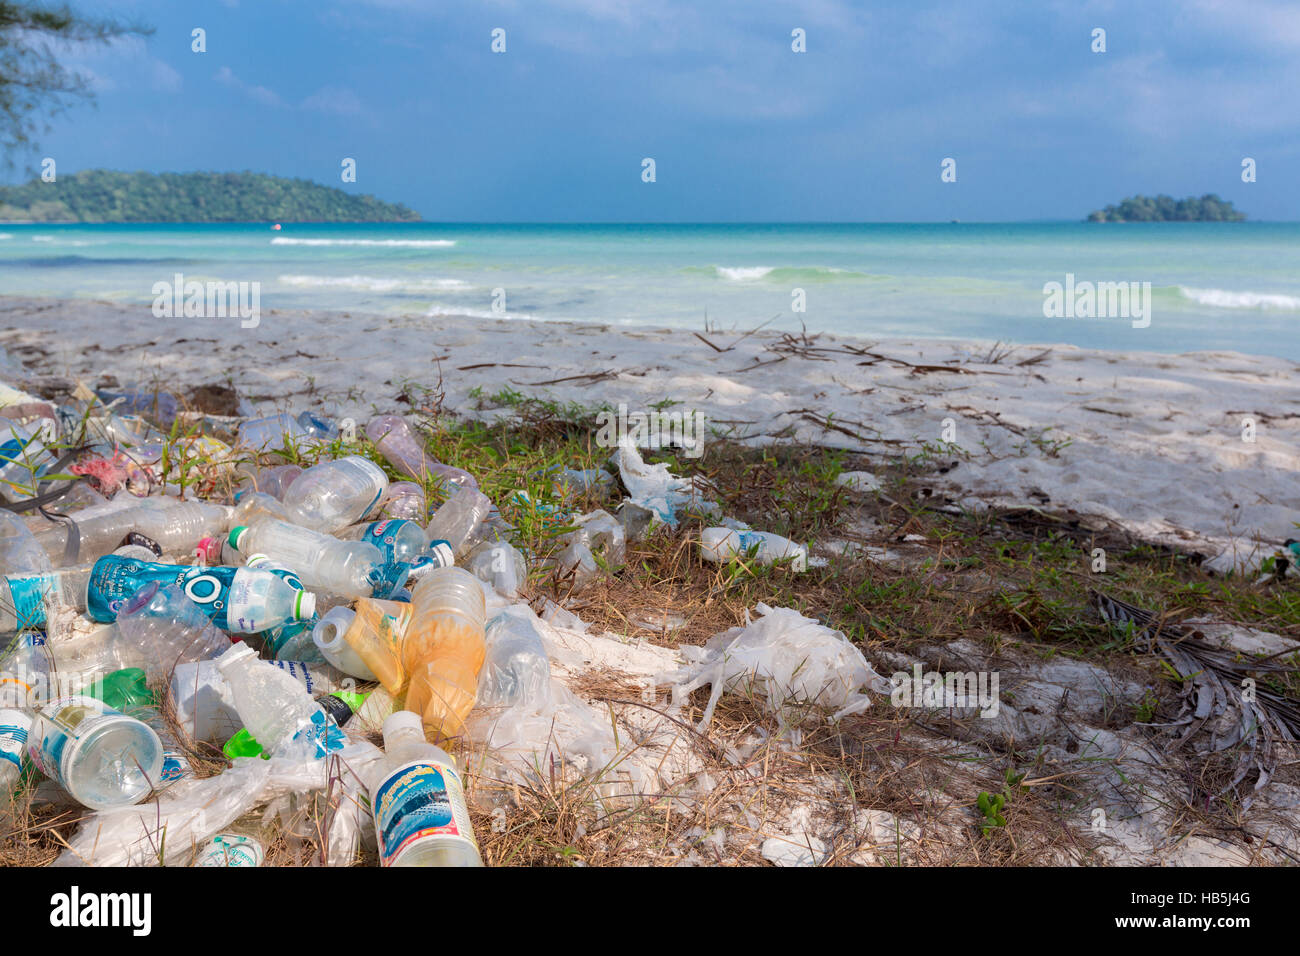 Plastic bottles, garbage and wastes on the beach of Koh Rong, Cambodia Stock Photo